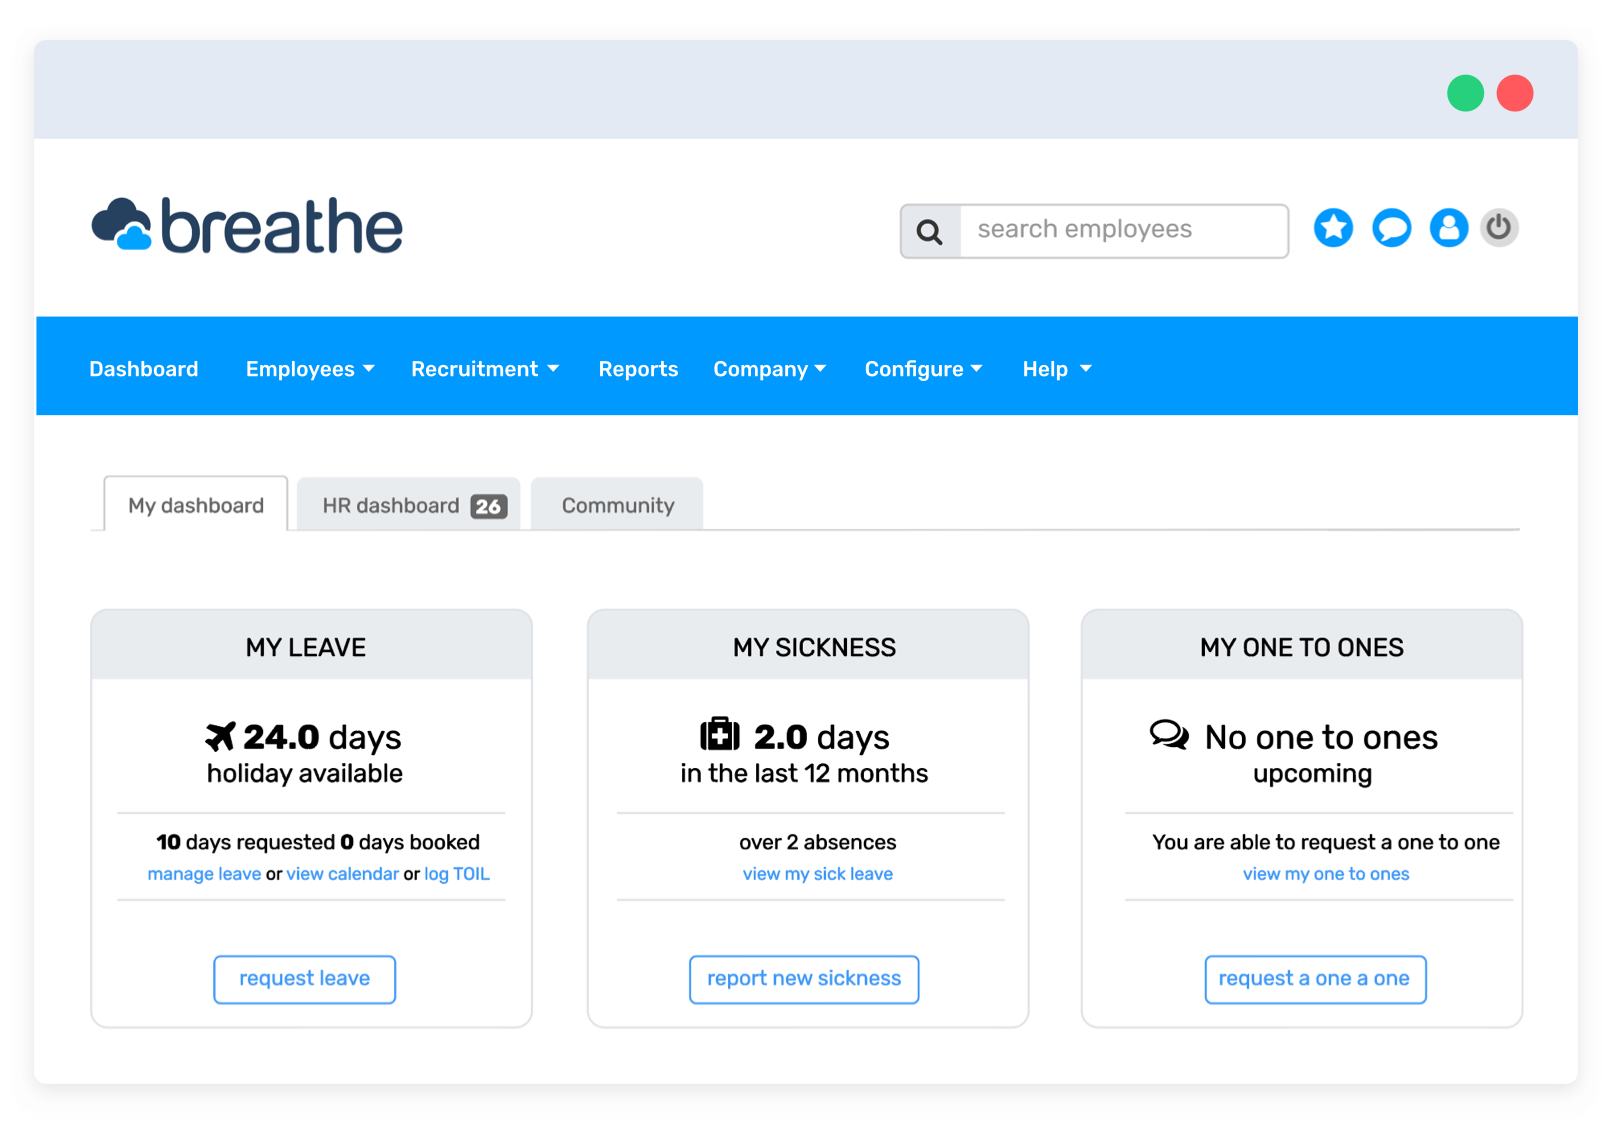 An image showing a personal dashboard on Breathe's software.